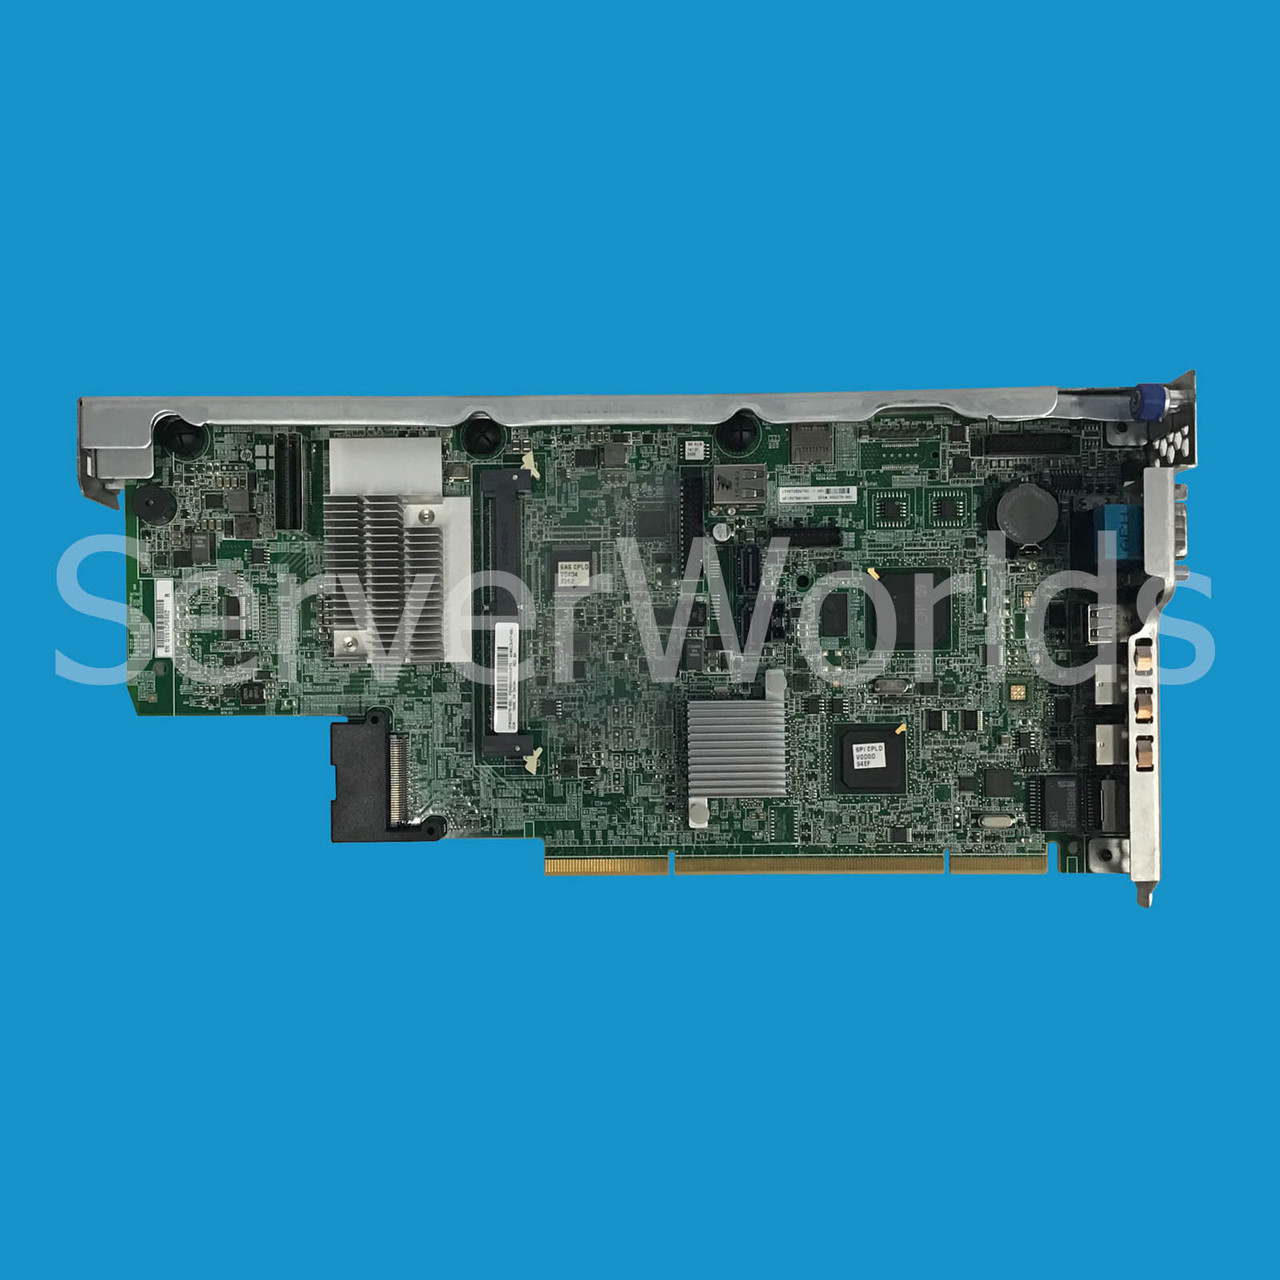 HP 802275-001 DL580 G9 System Peripheral Board 773612-001 013647-001